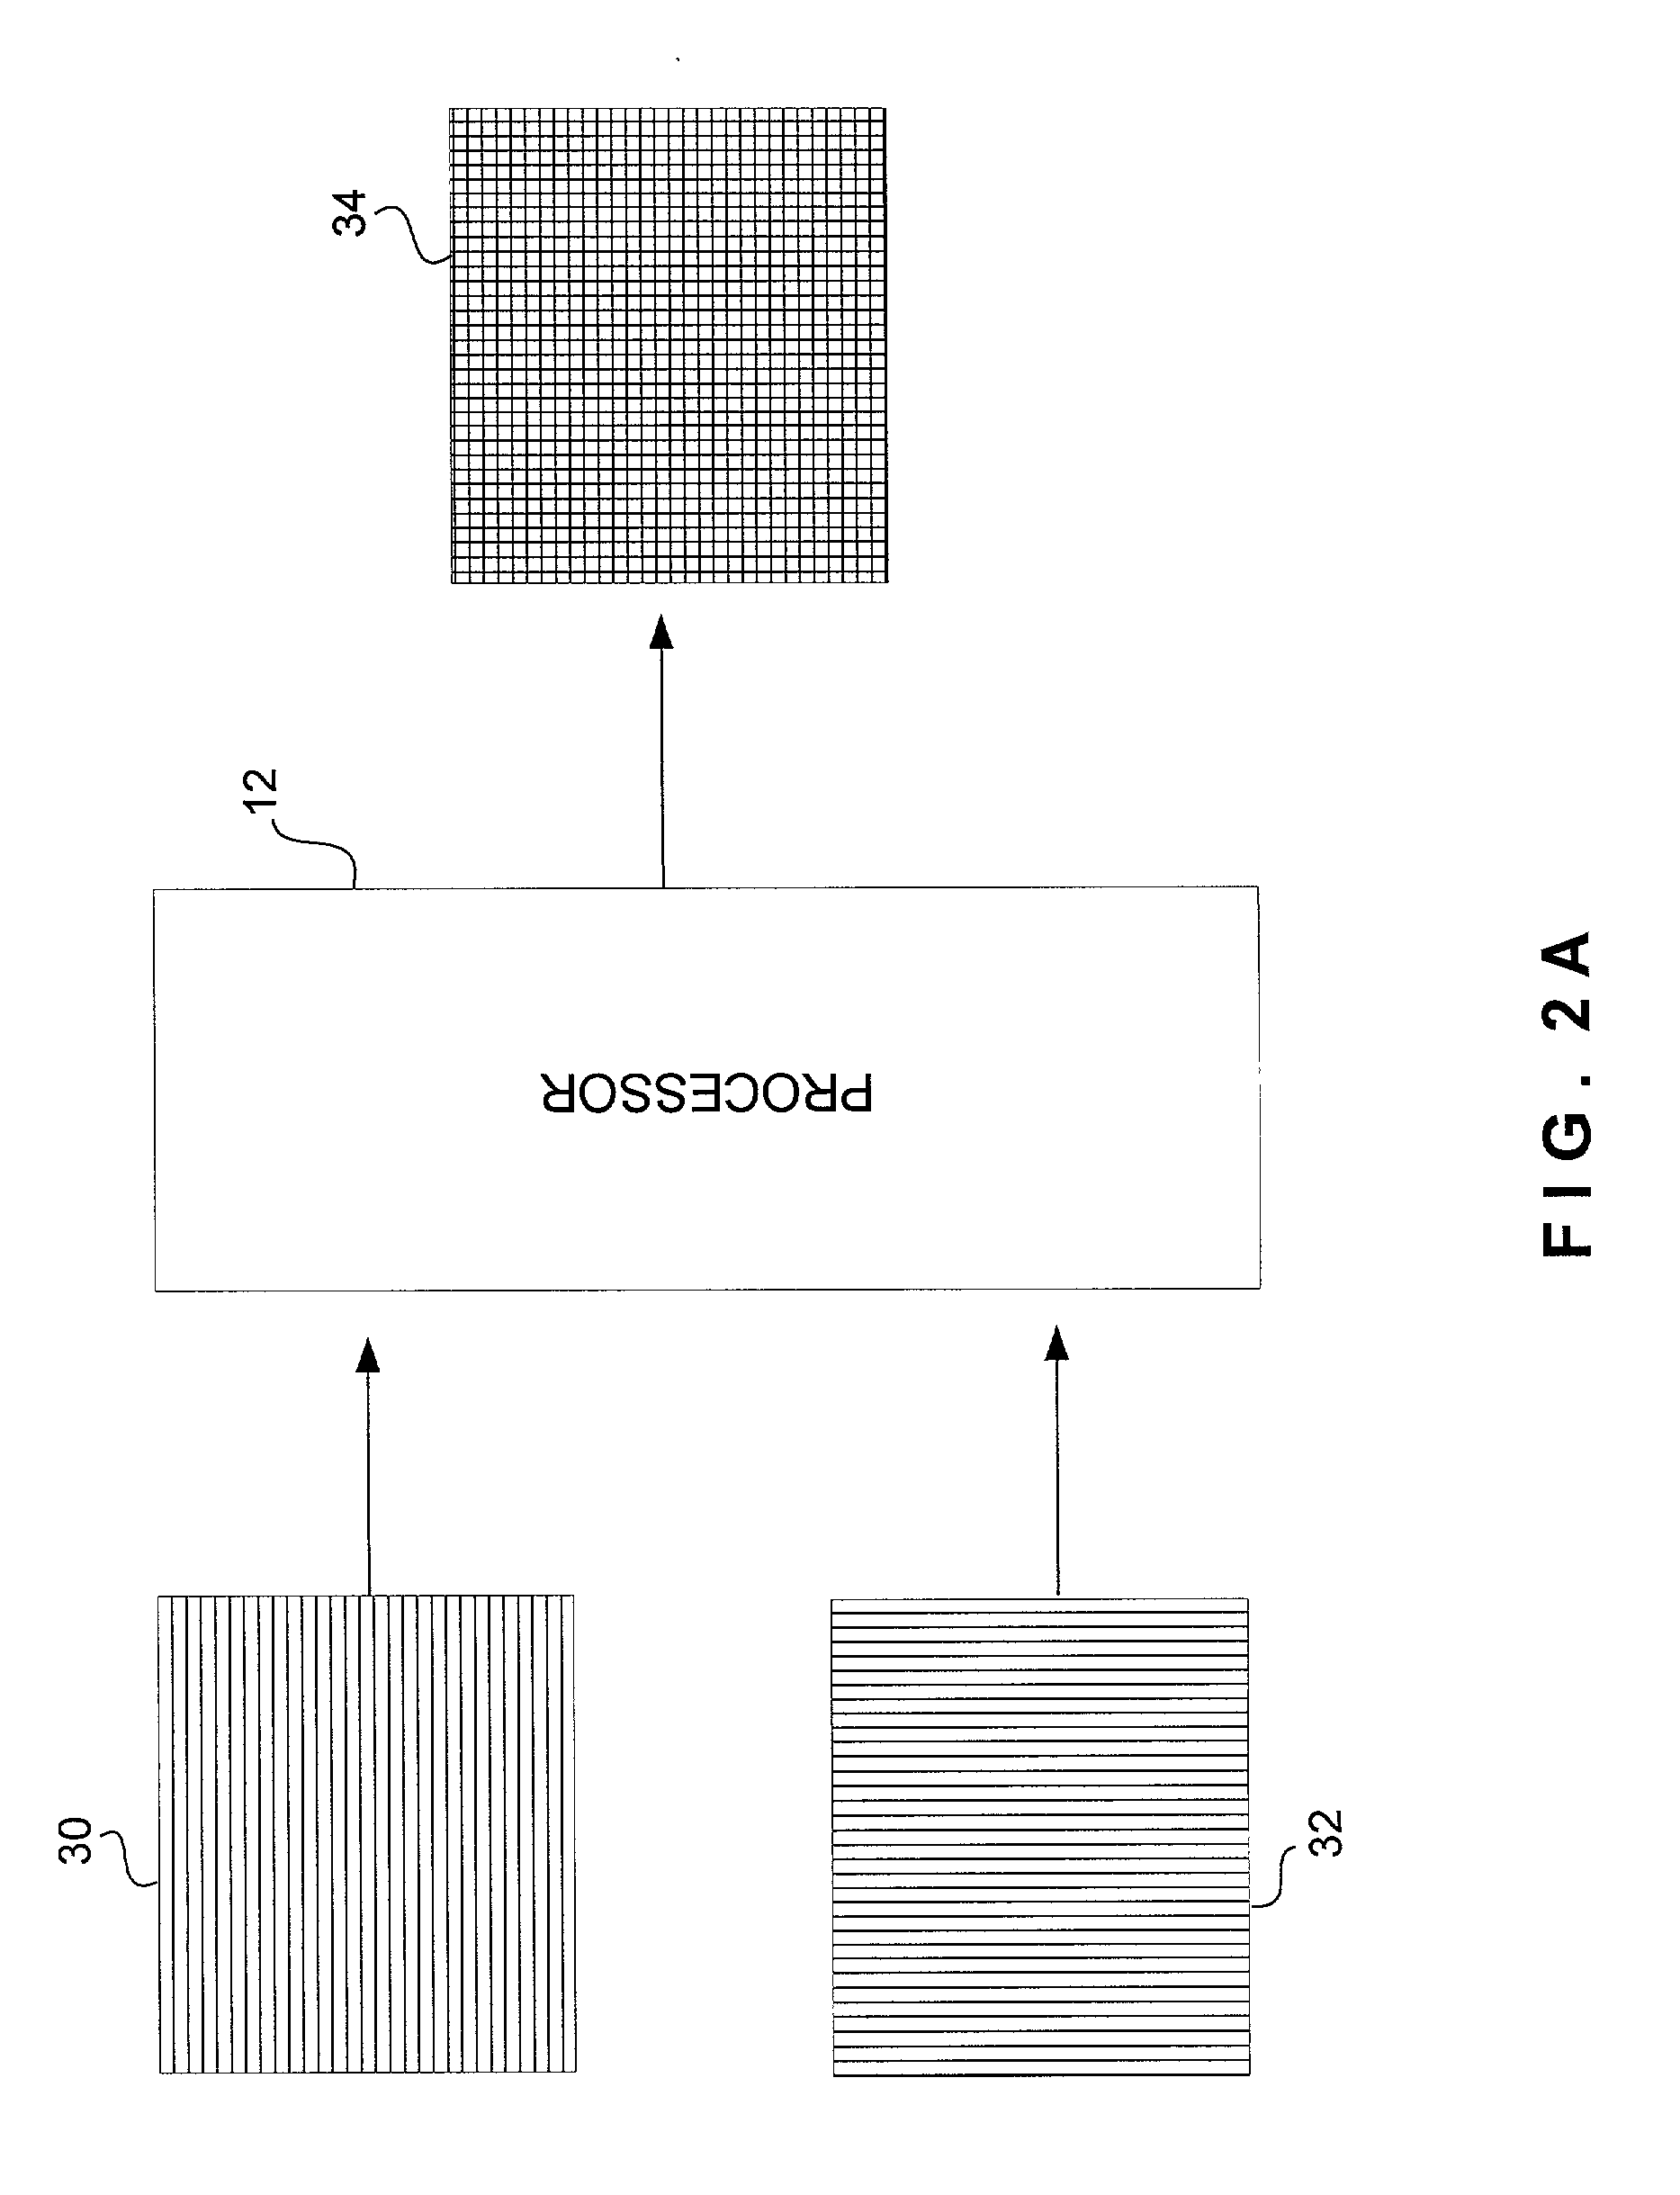 System and method for creating and delivering customized multimedia communications